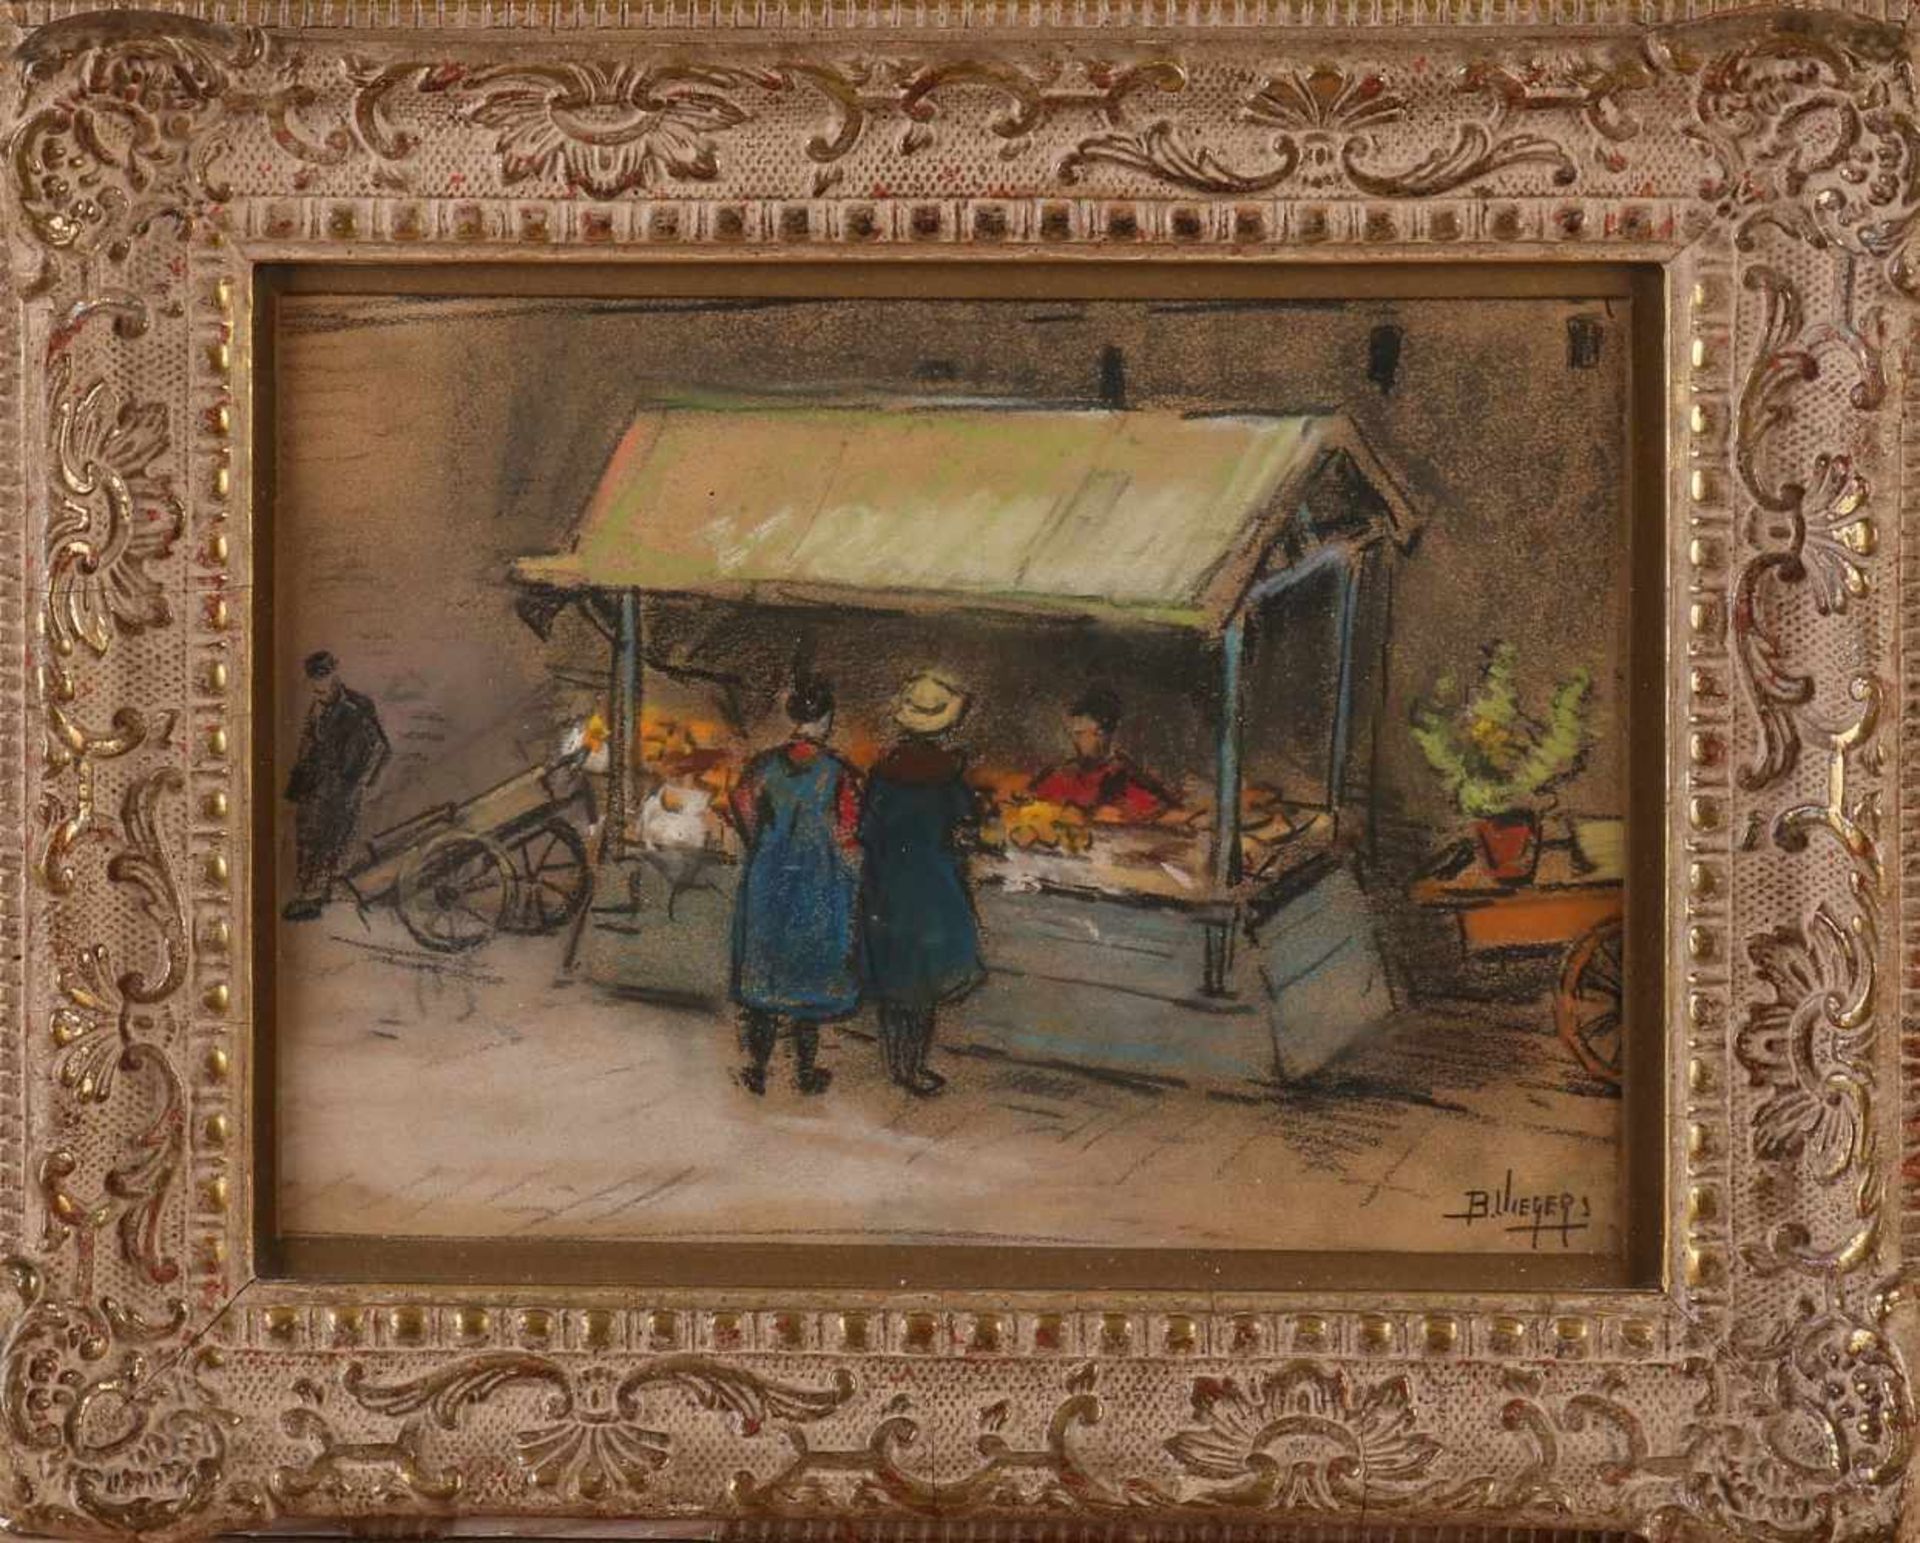 Ben Viegers. Stall with Figs. Pastel on paper. Size: 18 x H, B 25 cm. In good condition.